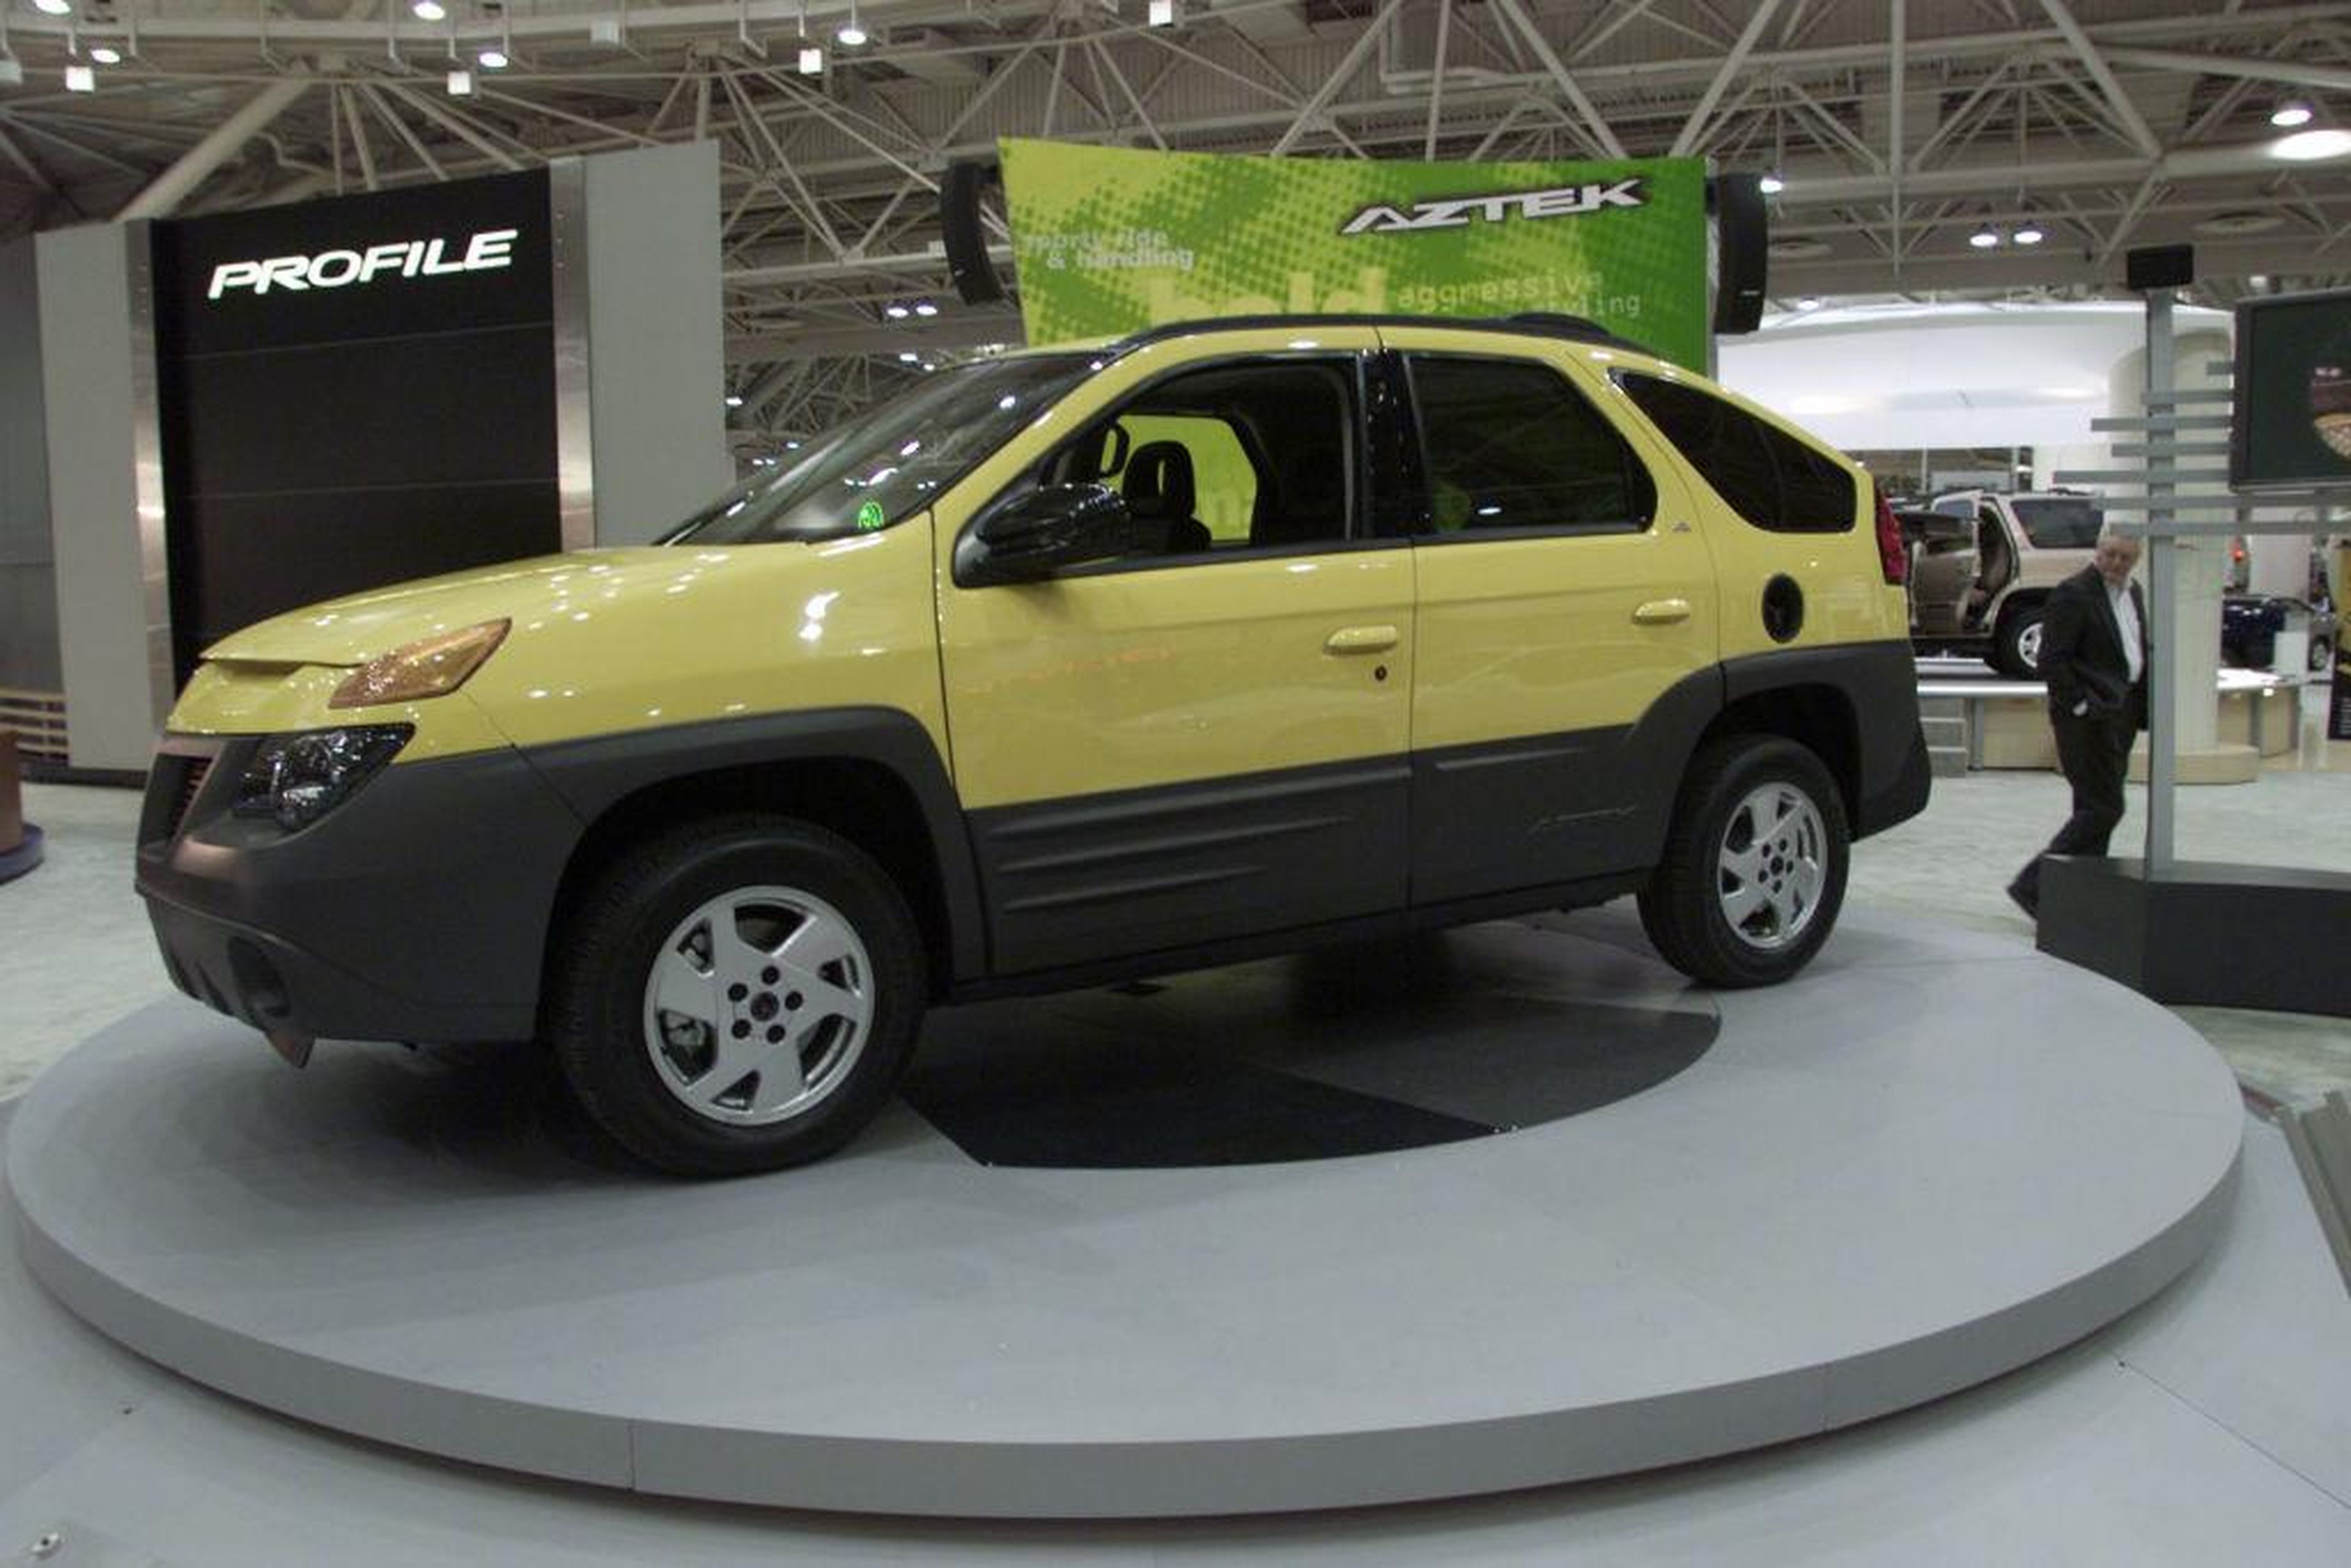 Sorry, but I see some Pontiac Aztek in the Cybertruck. The reviled proto-crossover perhaps deserves more respect than it usually gets.